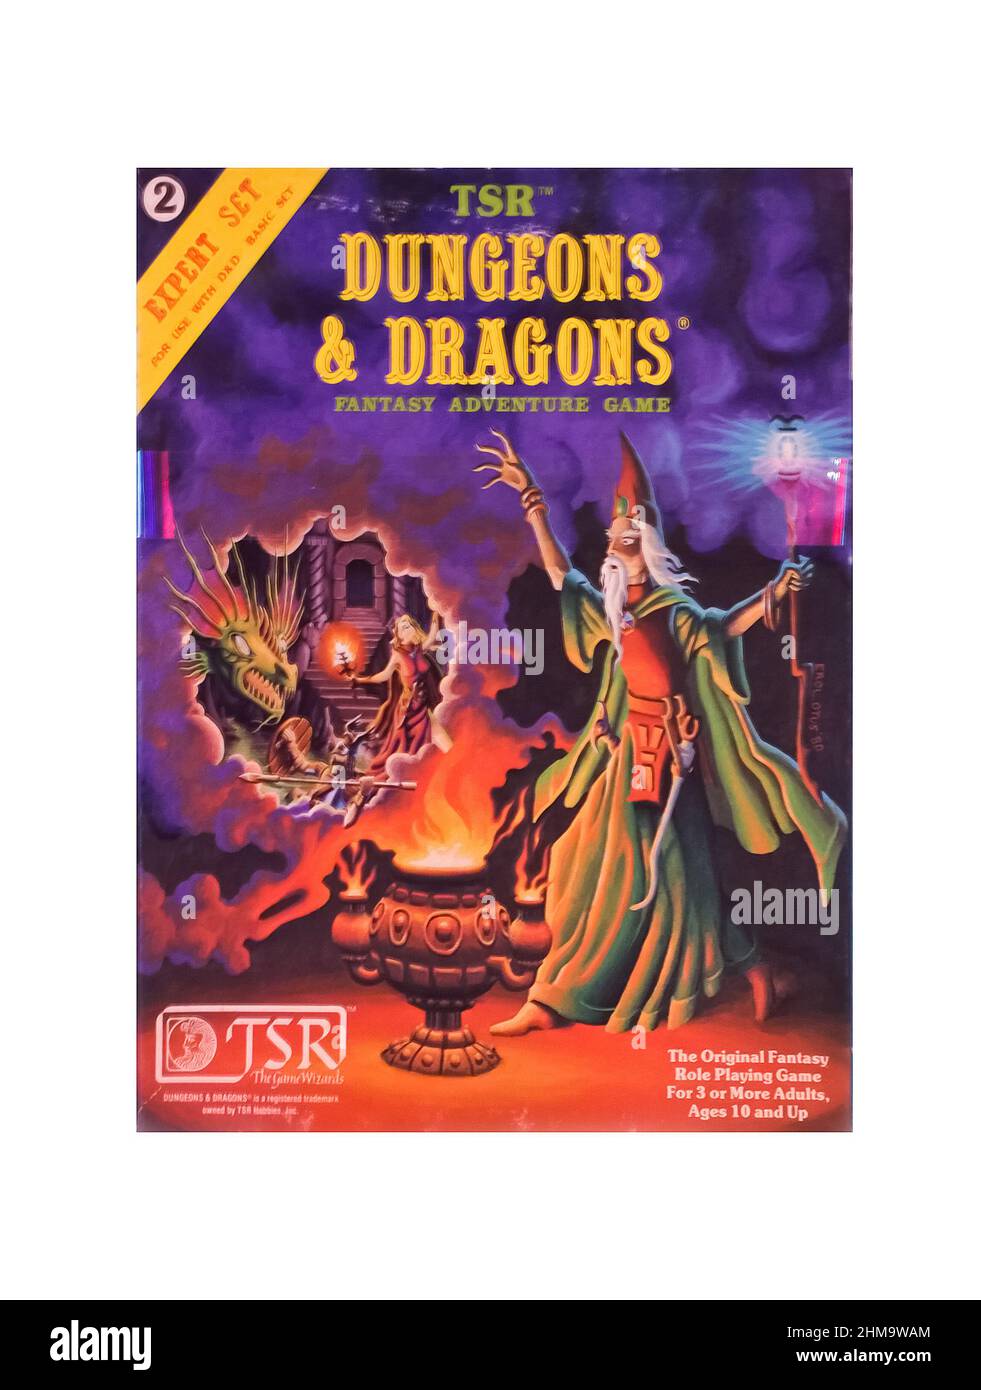 Rochester, New York, USA. December 16, 2021. Dungeons & Dragons Expert Set, circa 1988, isolated on white background, on display at the Strong Nationa Stock Photo